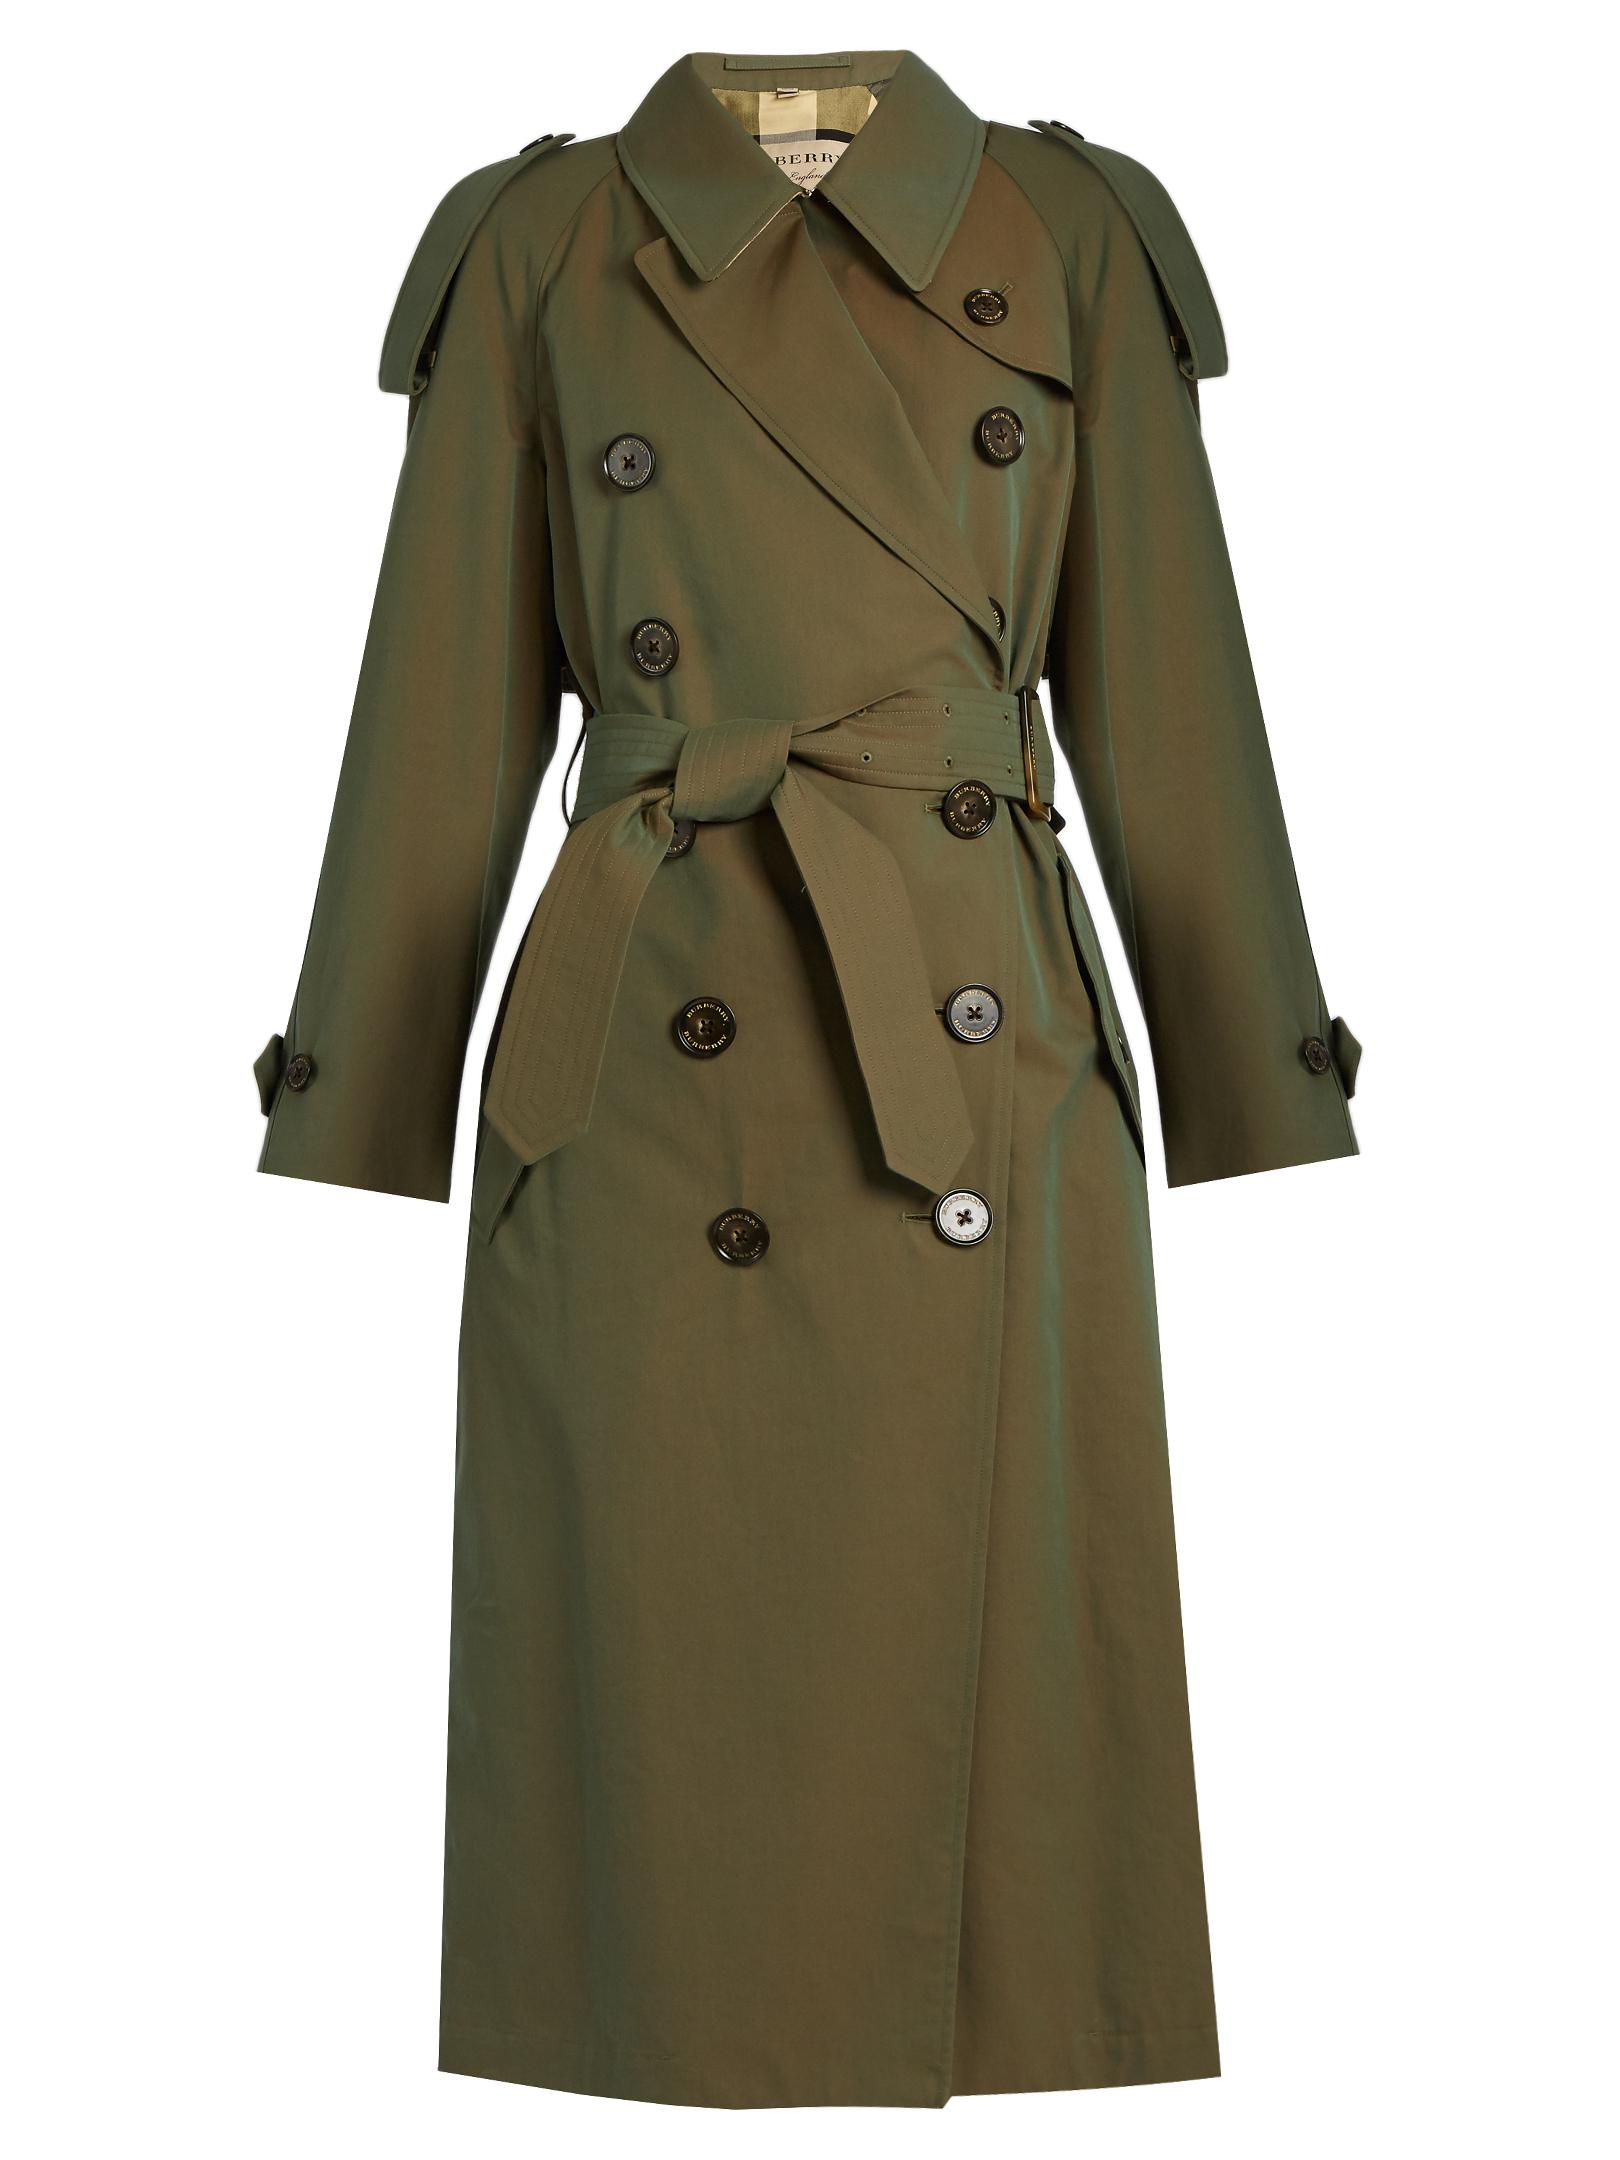 Burberry Foxriver Cotton Trench Coat in Khaki (Green) - Lyst